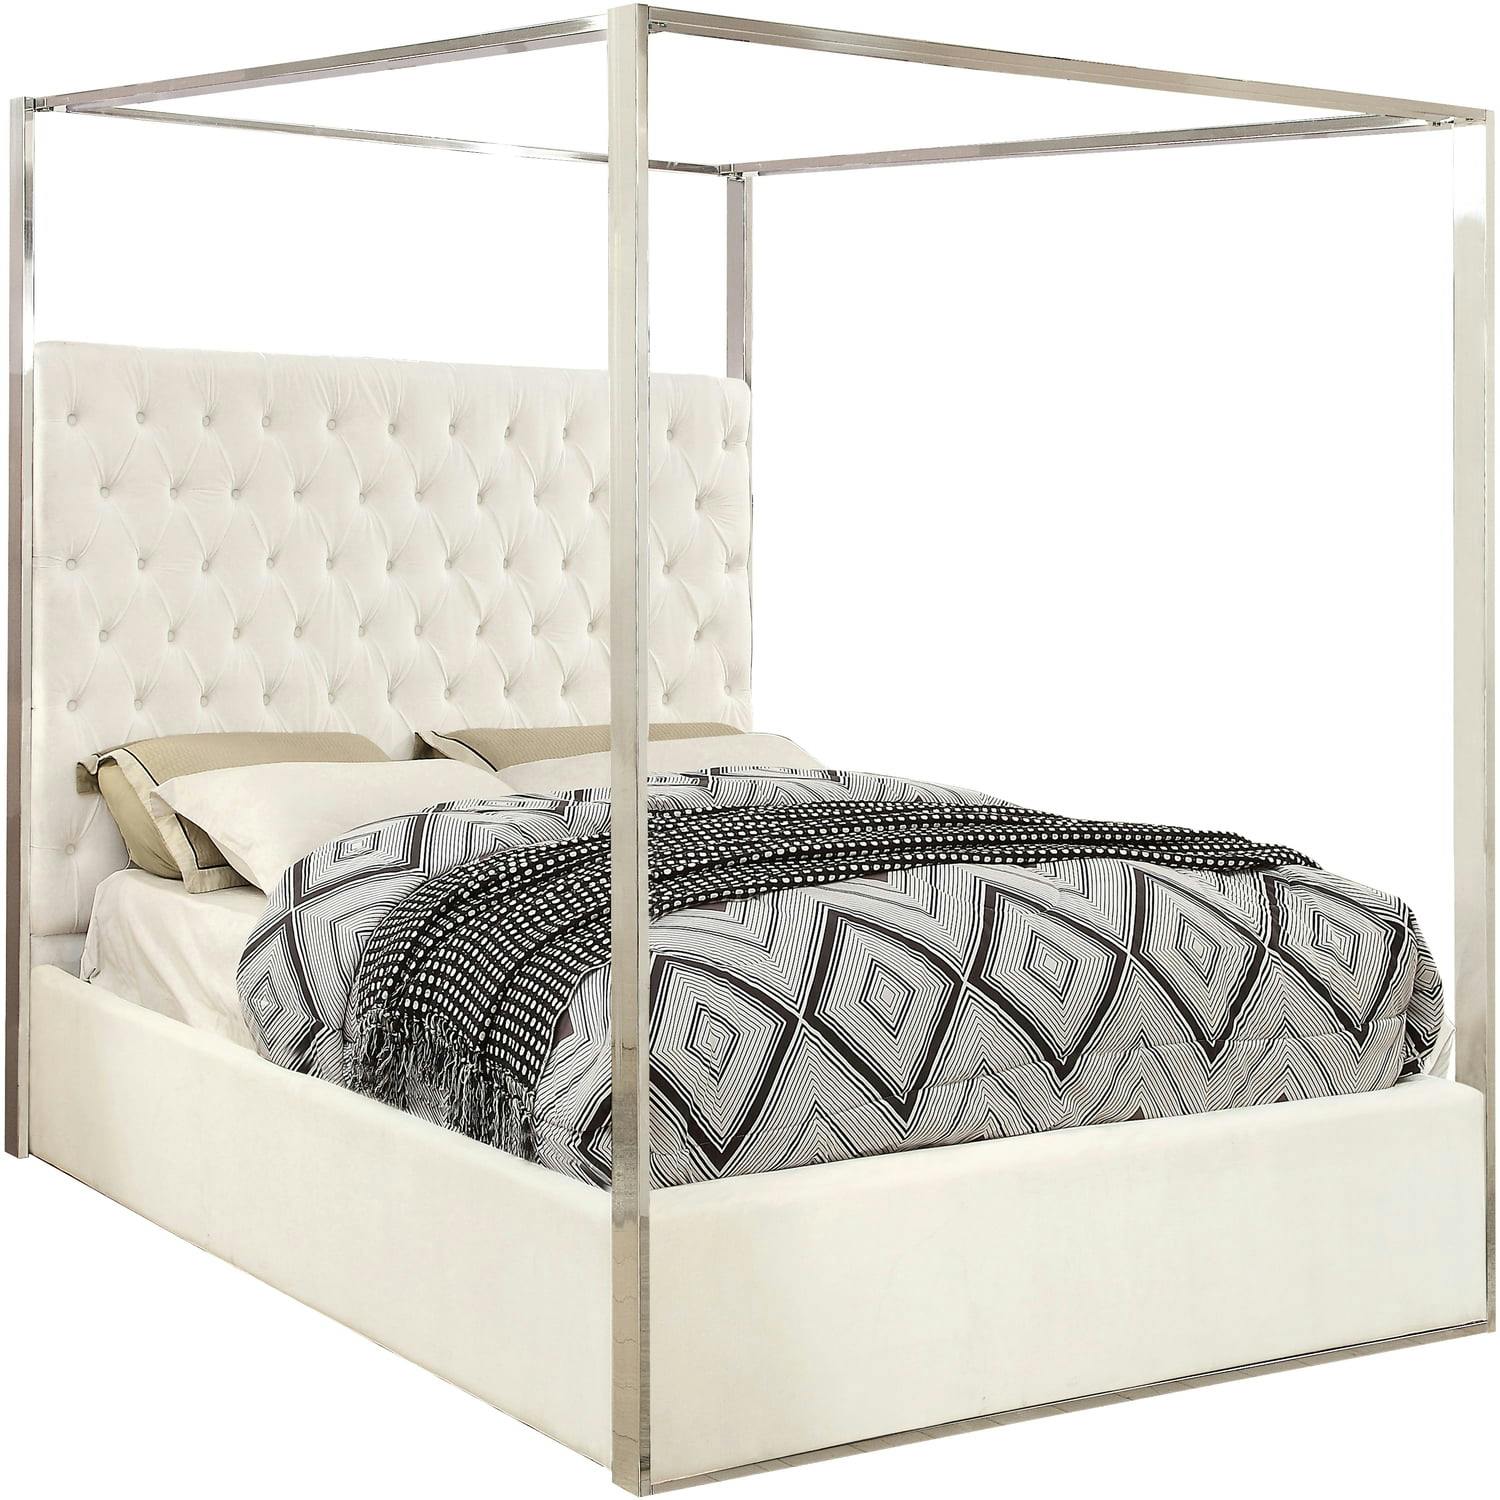 Regal White Velvet King-Sized Canopy Bed with Chrome Accents